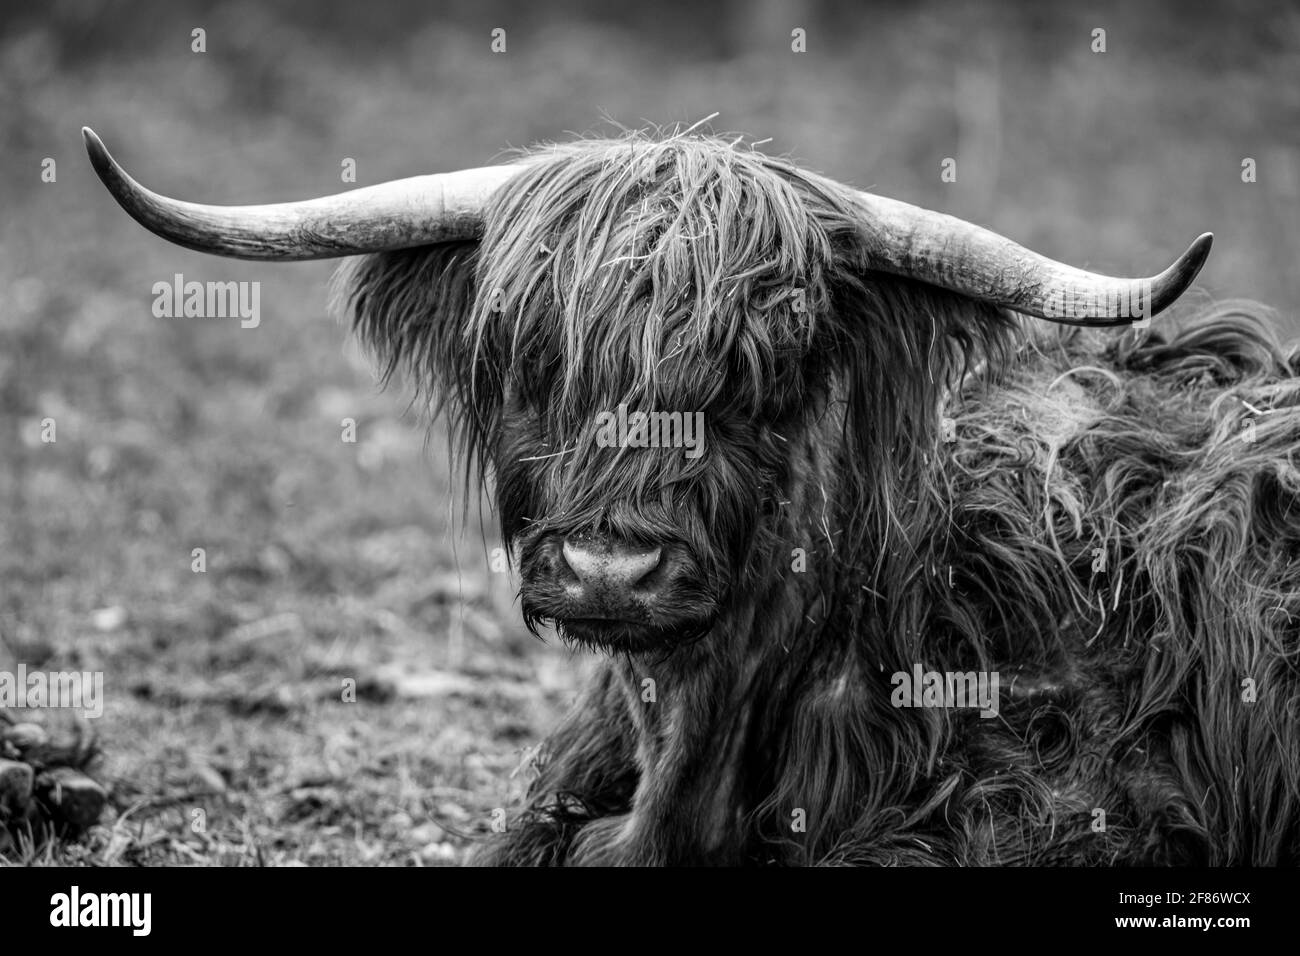 Highland cow horns hairy Black and White Stock Photos & Images - Alamy